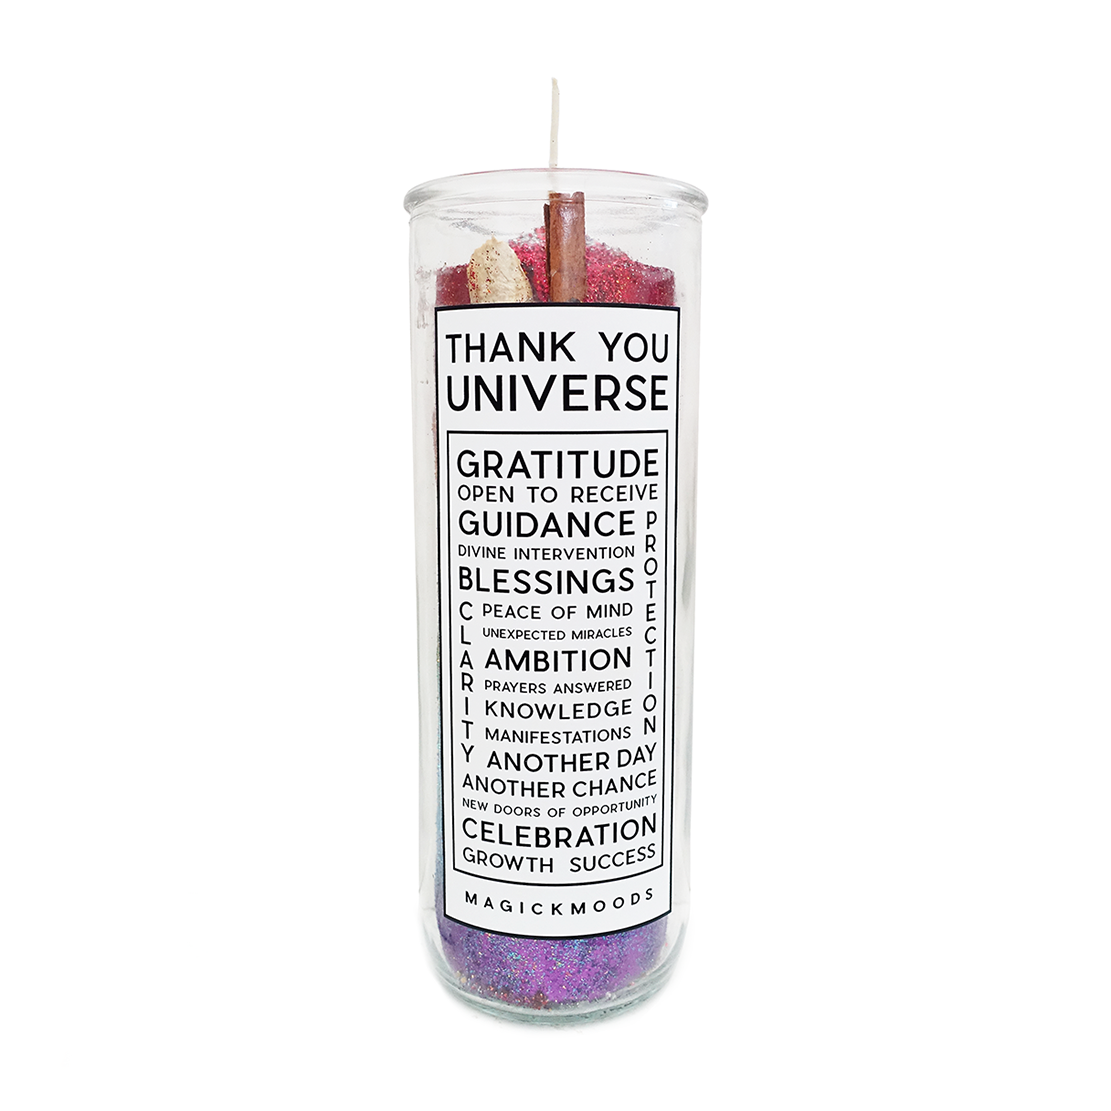 Thank You Universe 7-Day Meditation Candle - PREORDER - Ships by July 28th, 2023